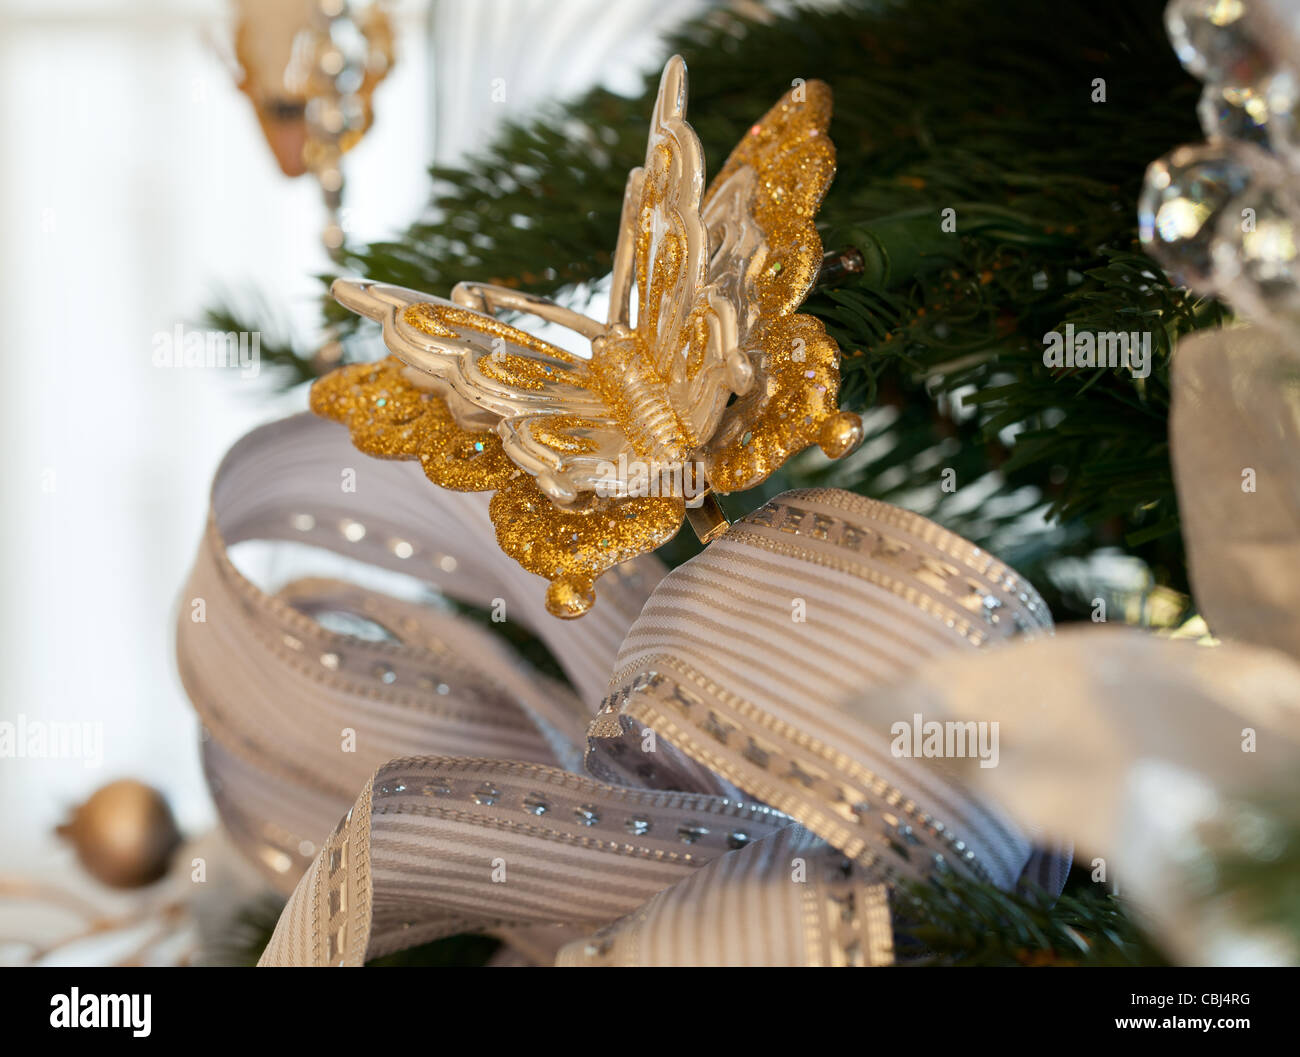 Christmas tree decorated with silver and white ribbons and